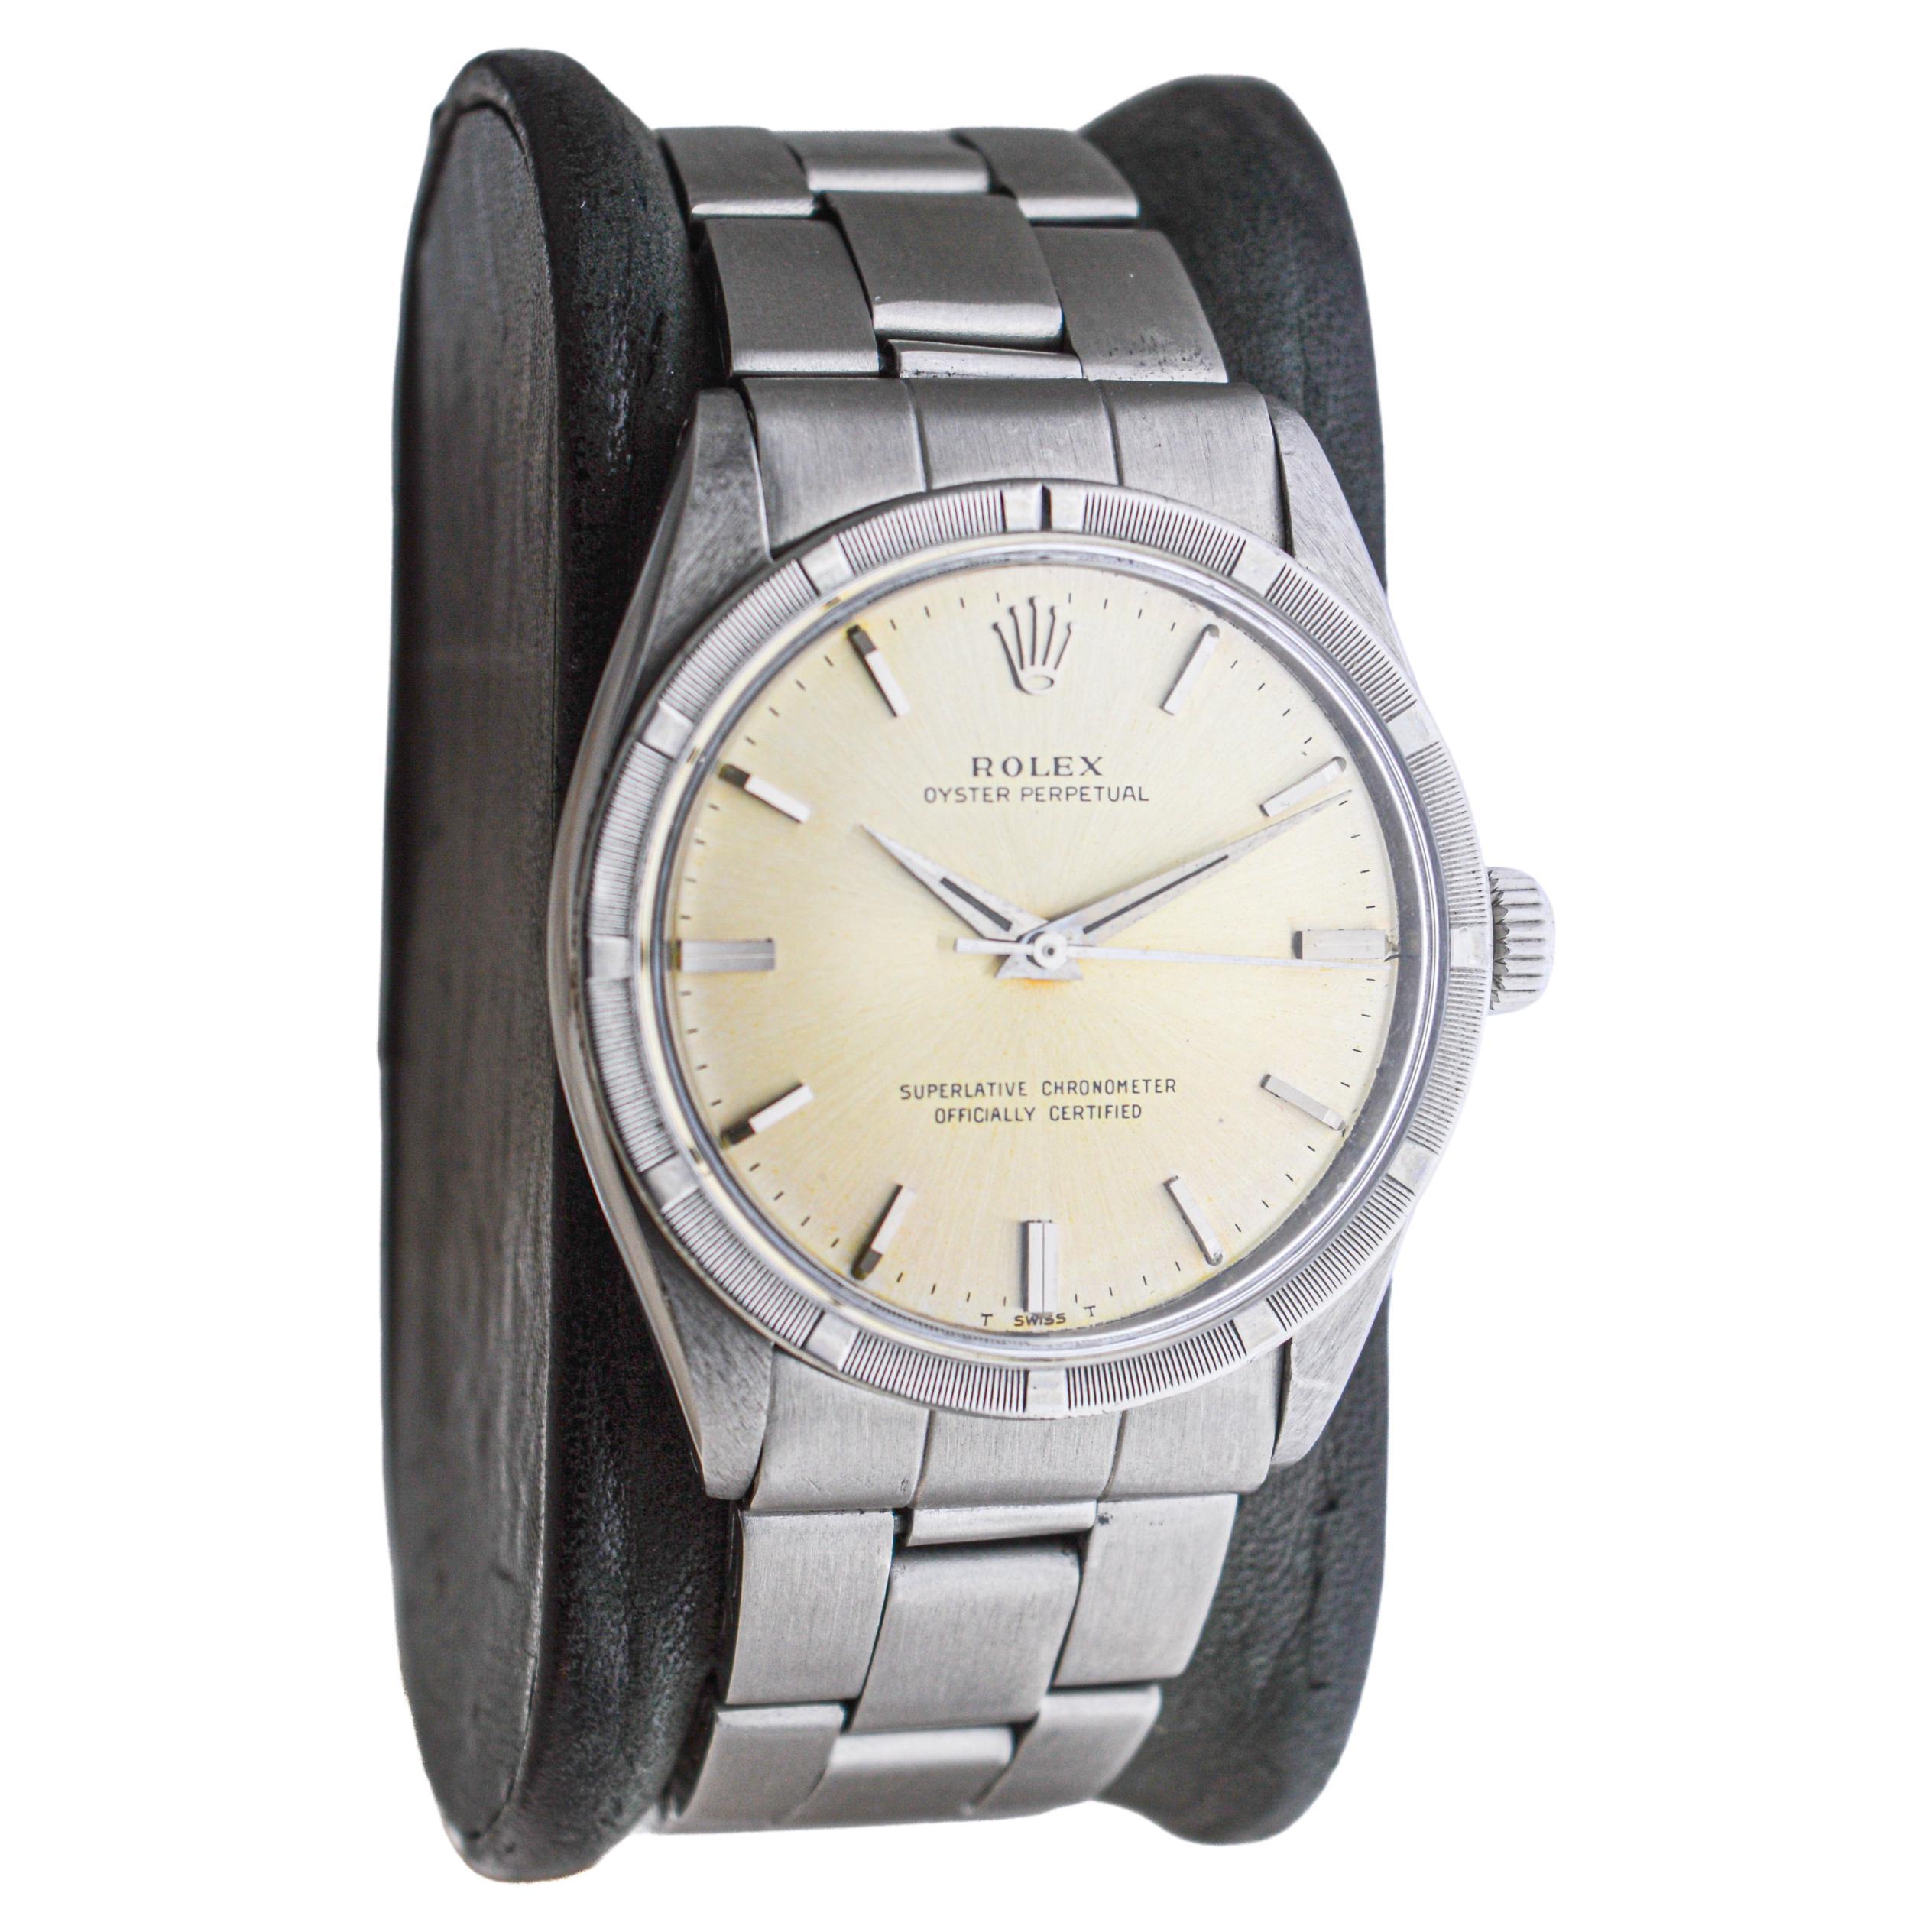 FACTORY / HOUSE: Rolex Watch Company
STYLE / REFERENCE: Oyster Perpetual / Reference 1007
METAL / MATERIAL: Stainless Steel
CIRCA / YEAR: 1964
DIMENSIONS / SIZE: Length 39mm x Diameter 34mm
MOVEMENT / CALIBER: Perpetual Winding / 26 Jewels / Caliber